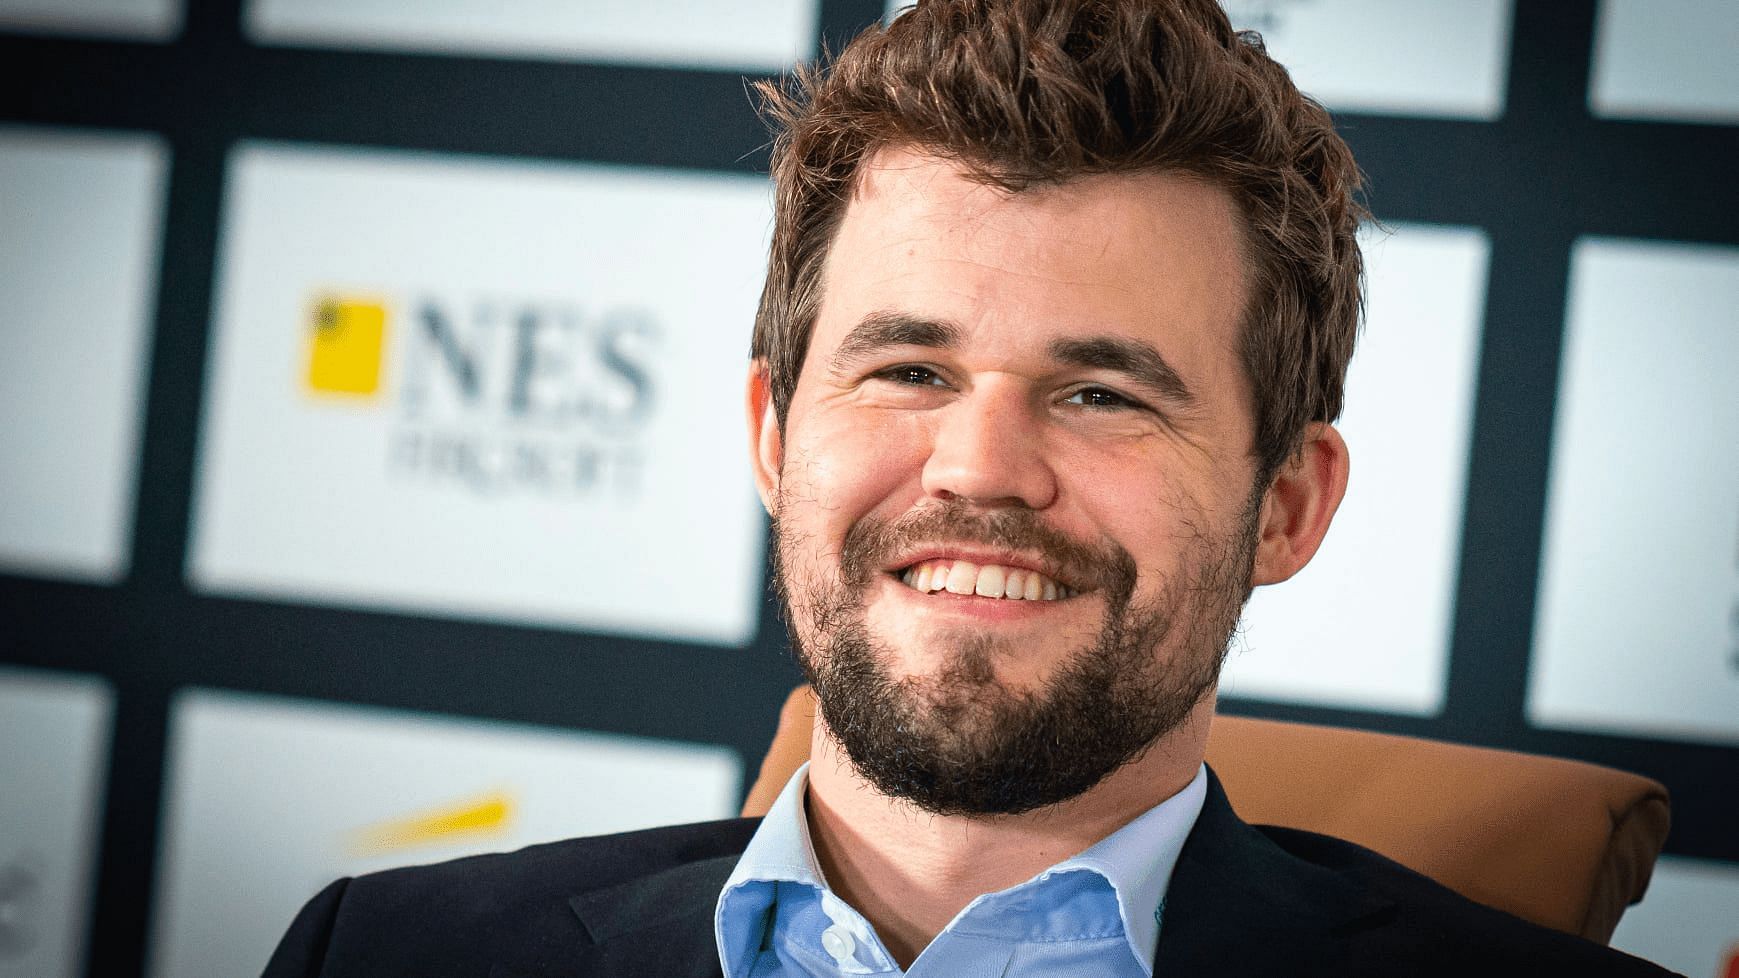 Five-time world chess champion Magnus Carlsen says he will not